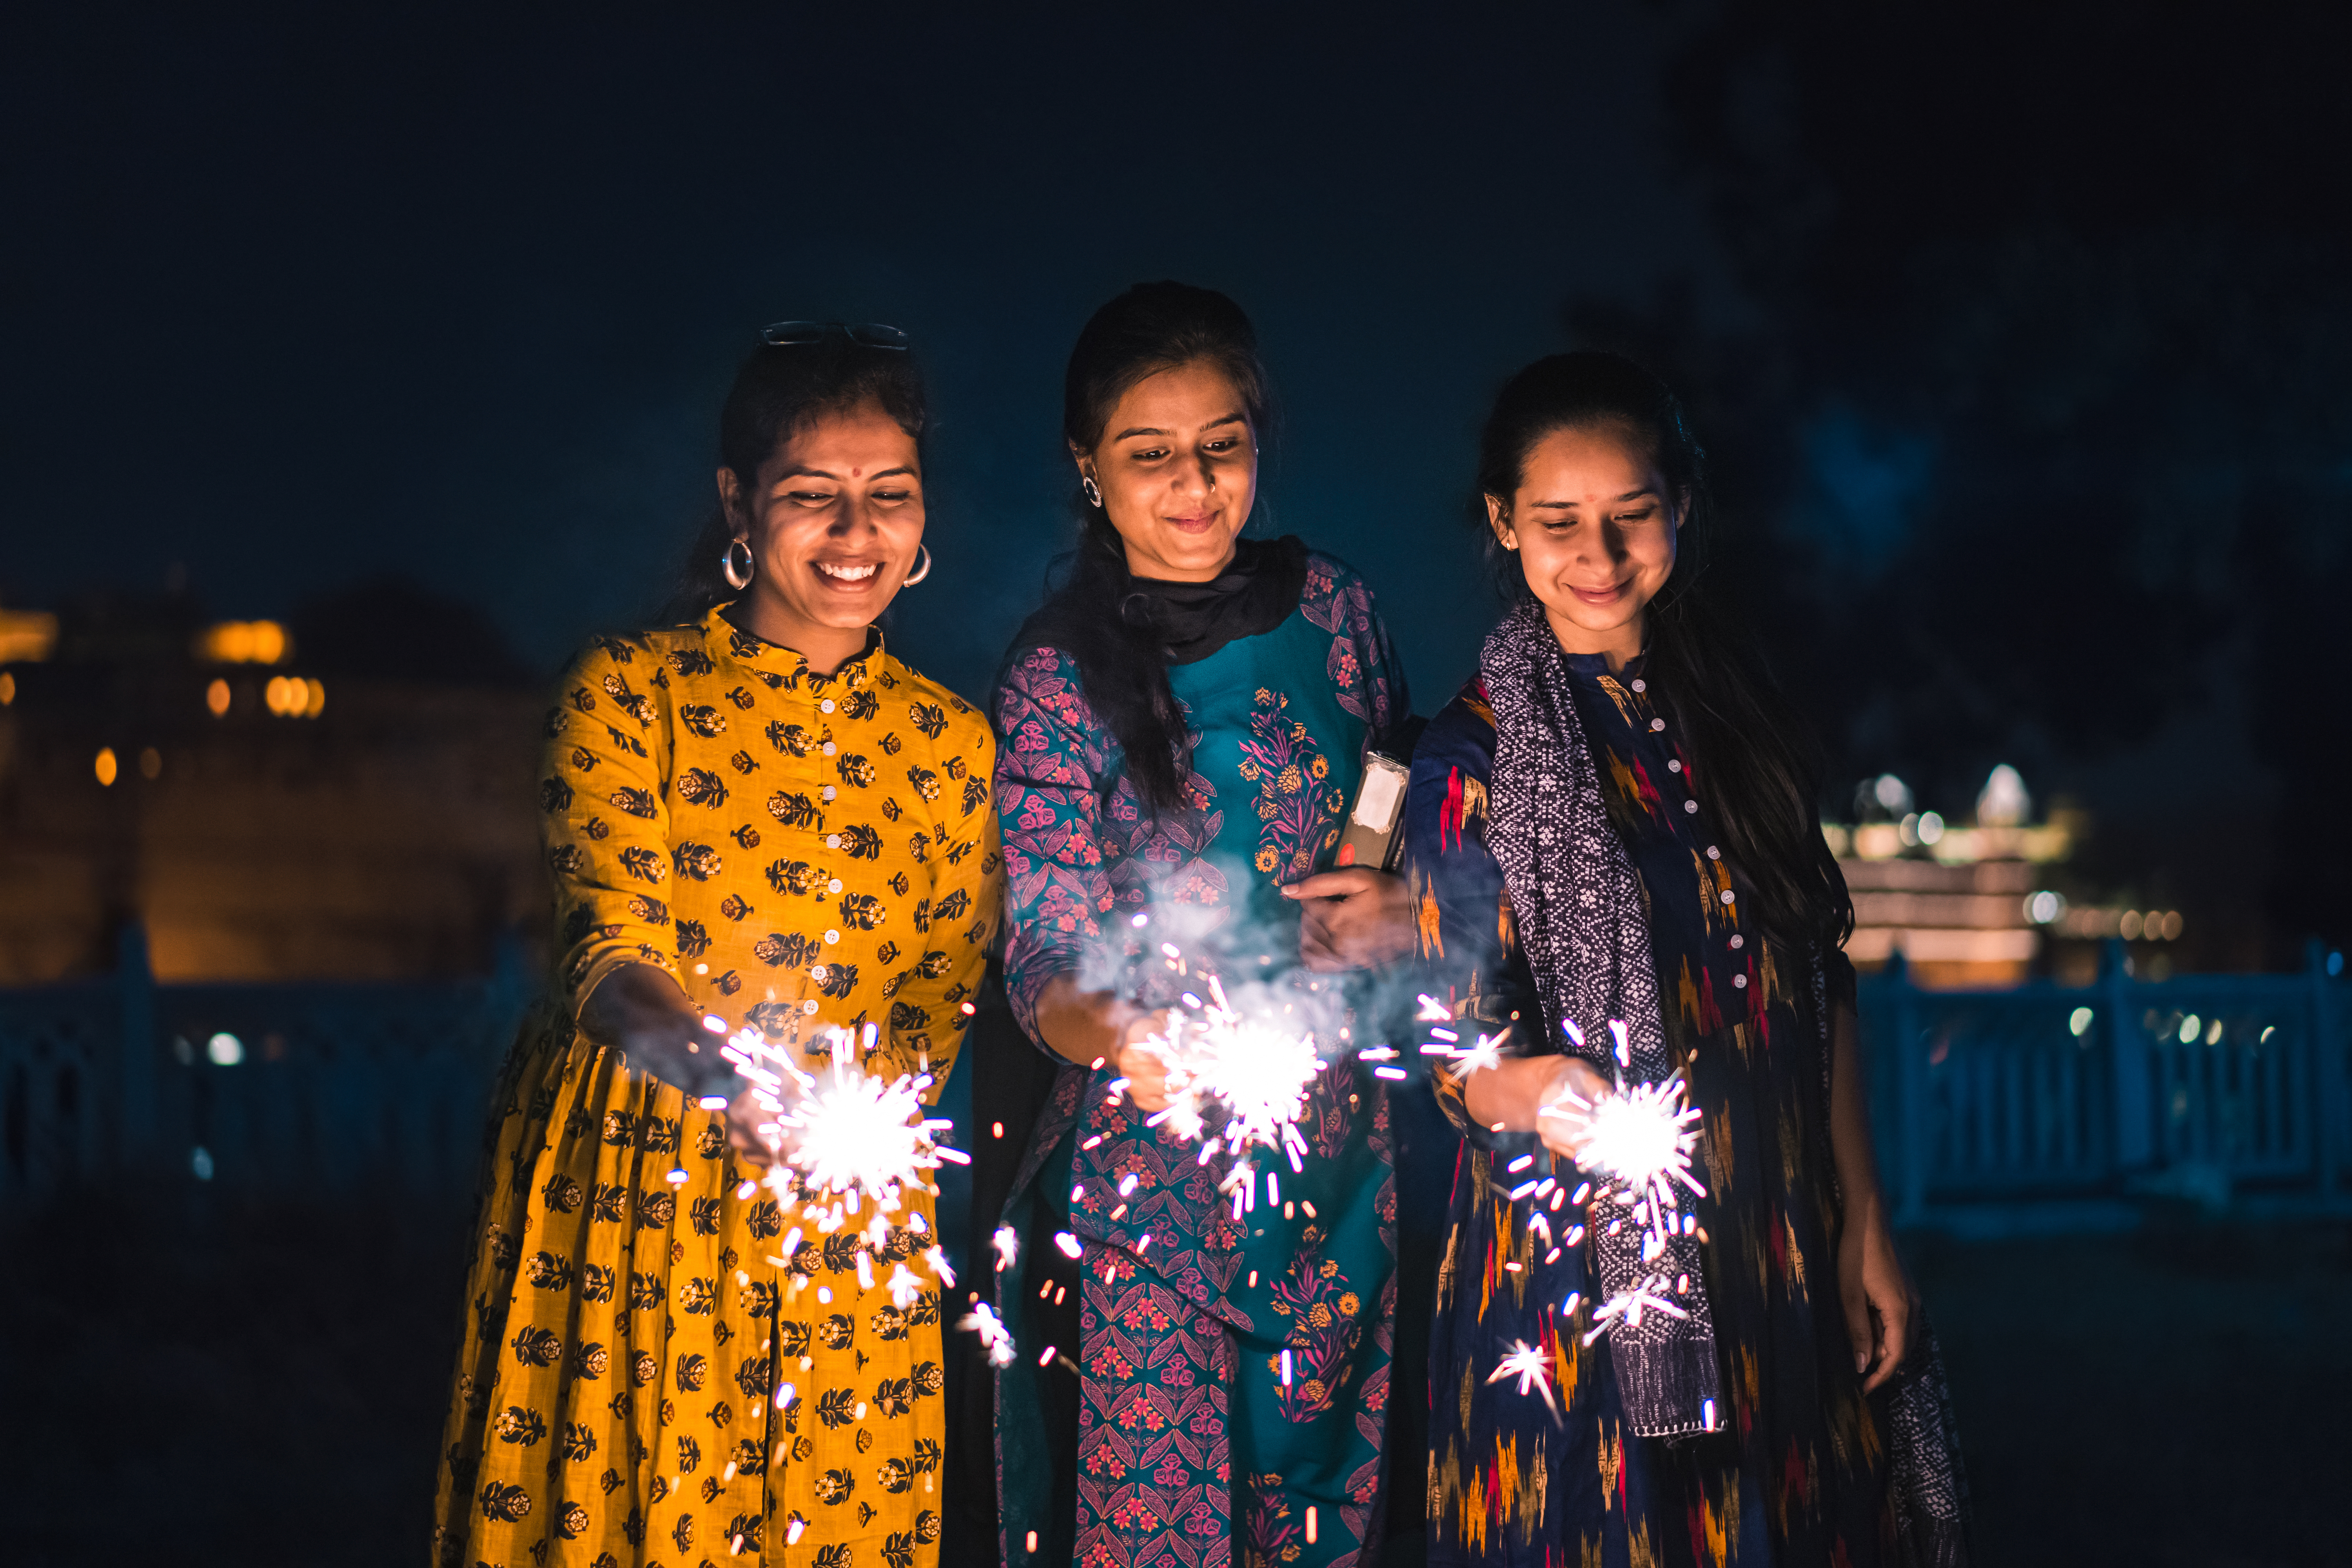 Three young Indian women with bengal fireworks, Udaipur, India